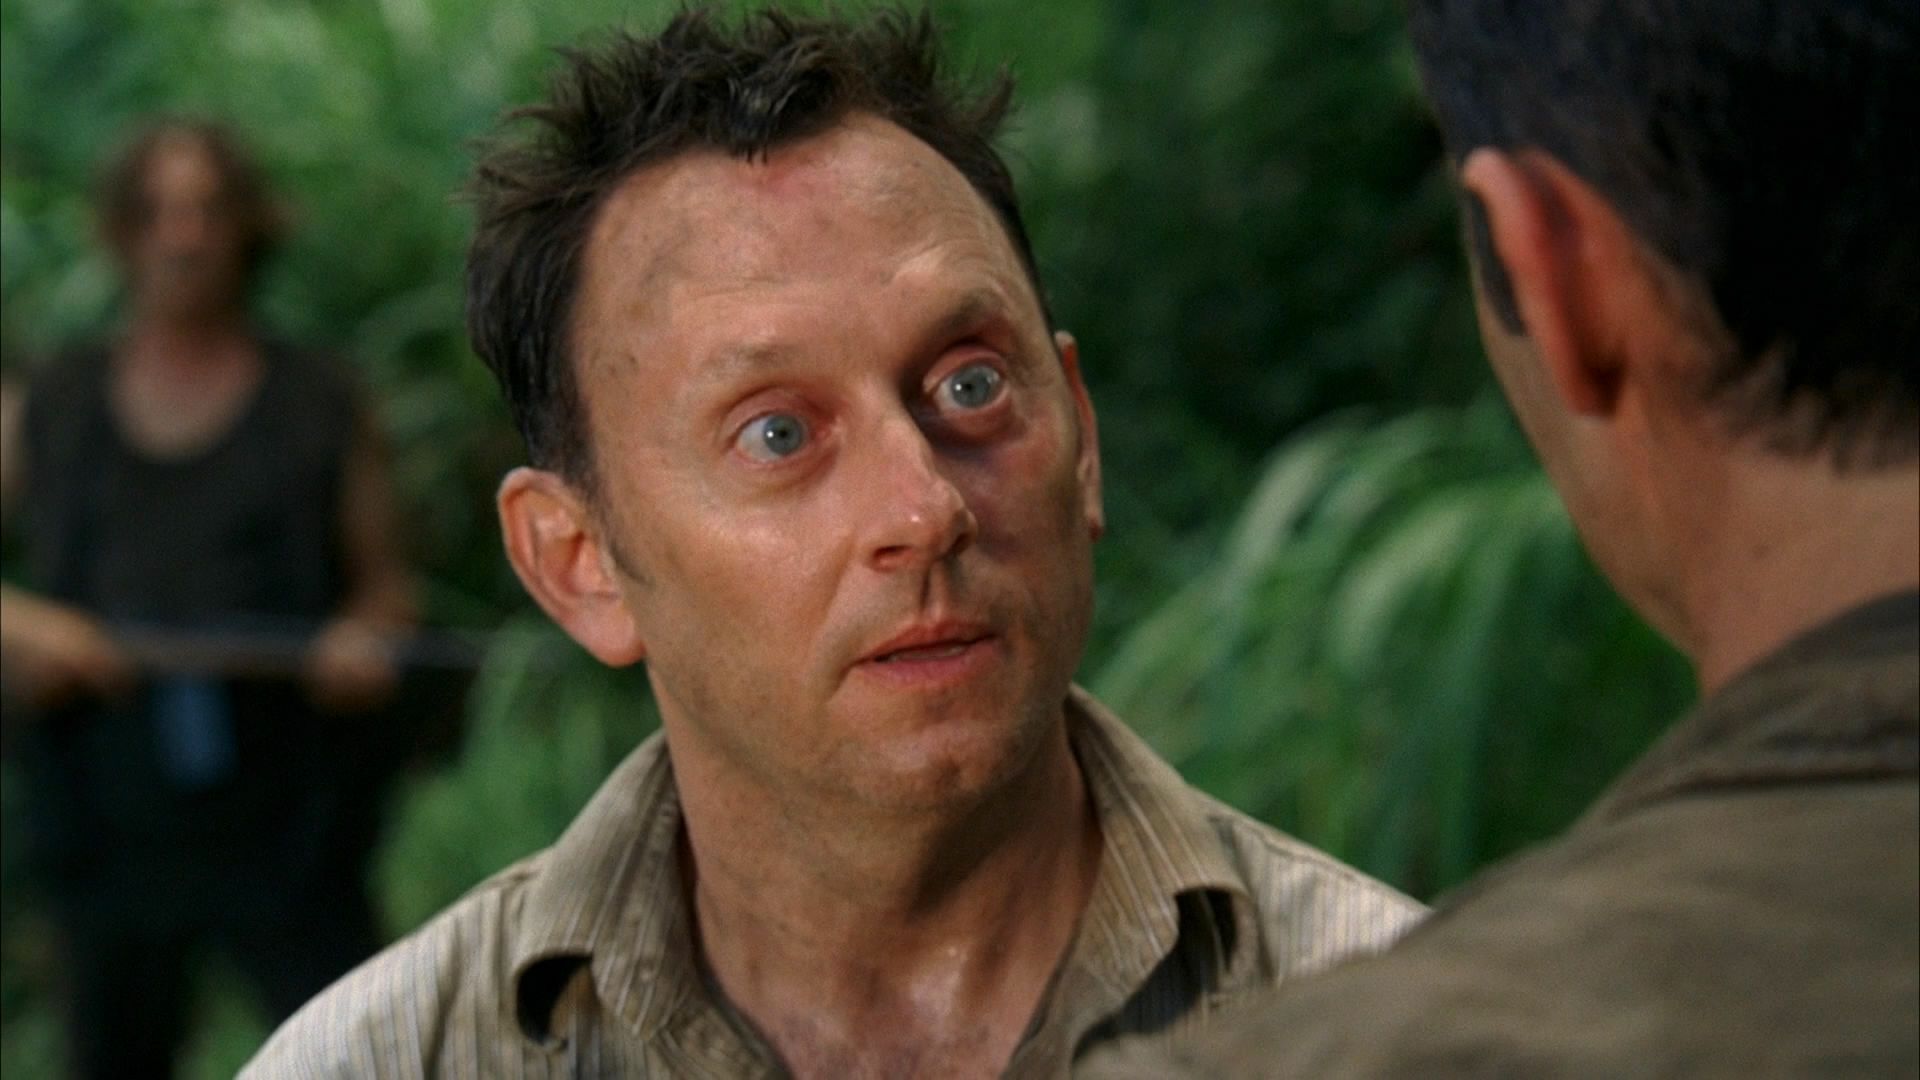 Benjamin Linus gives orders to the Others